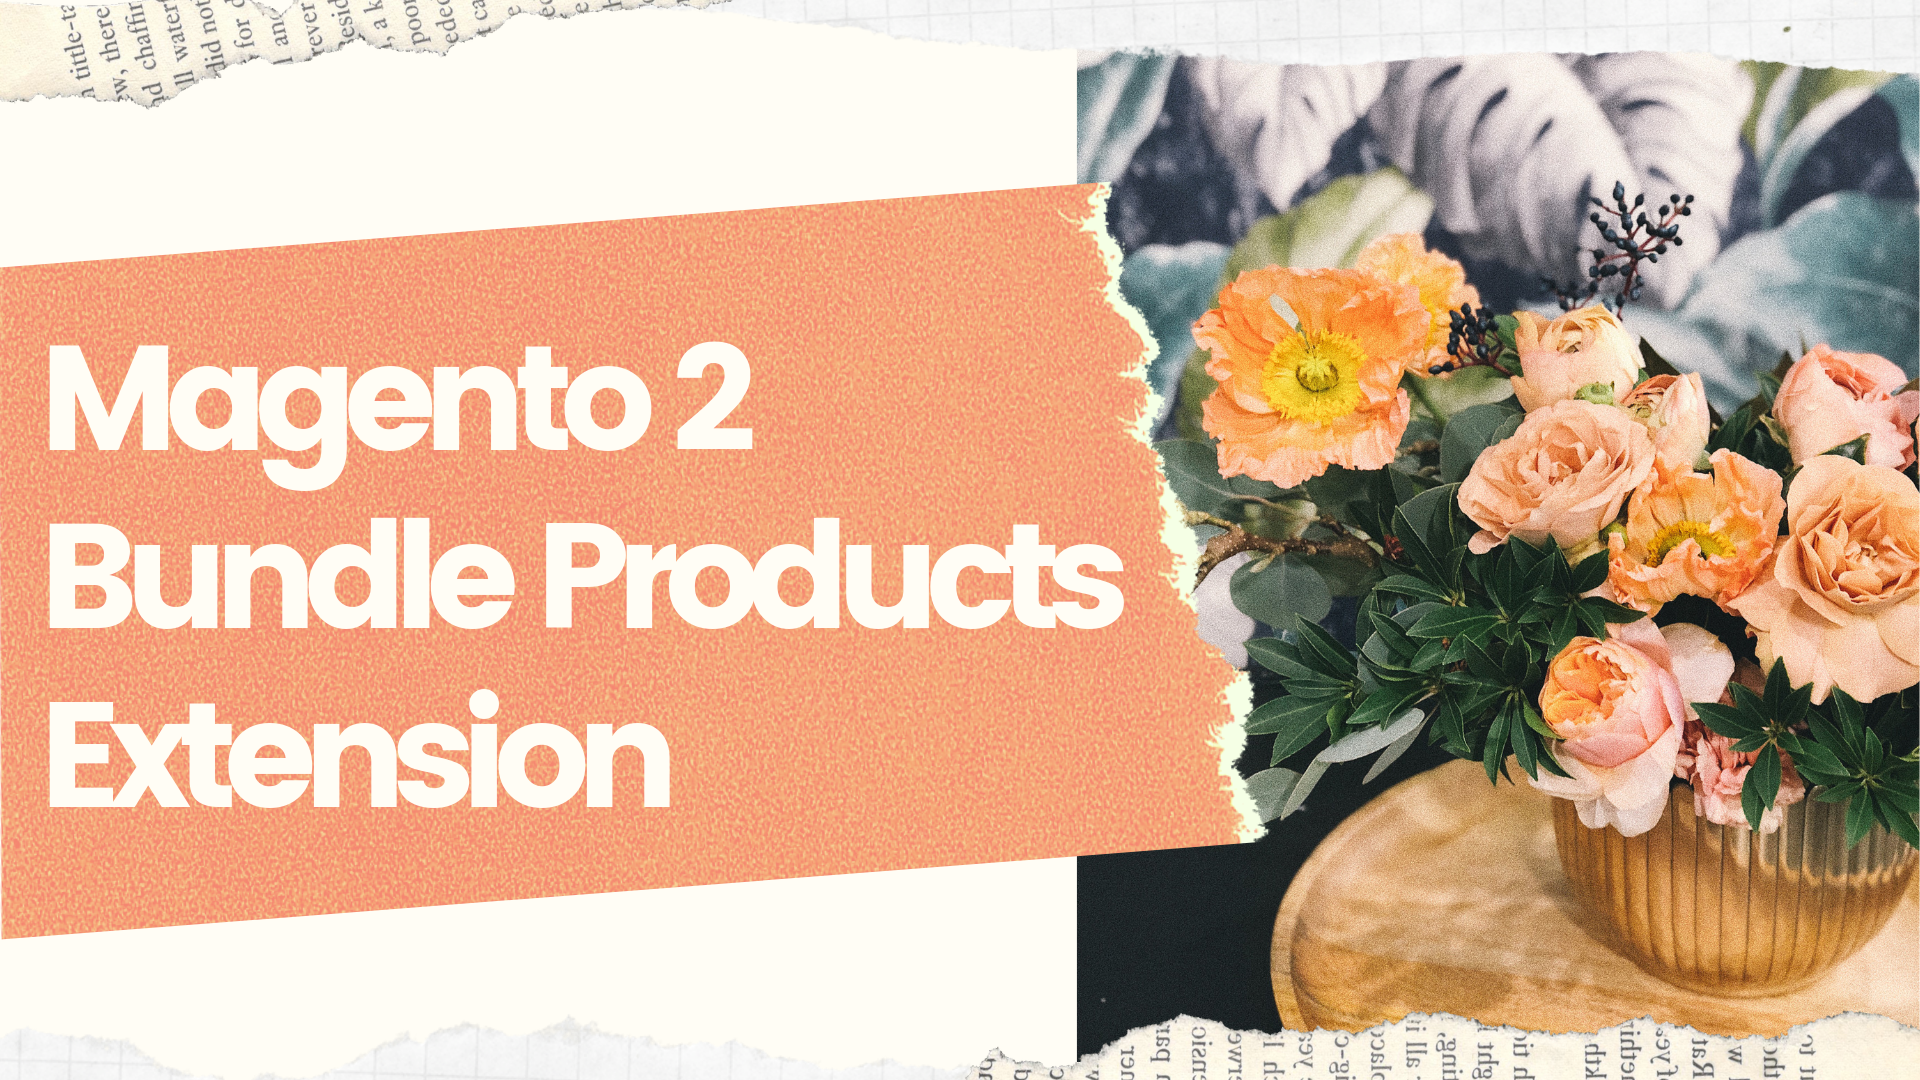 Magento 2 Bundle Products Extension